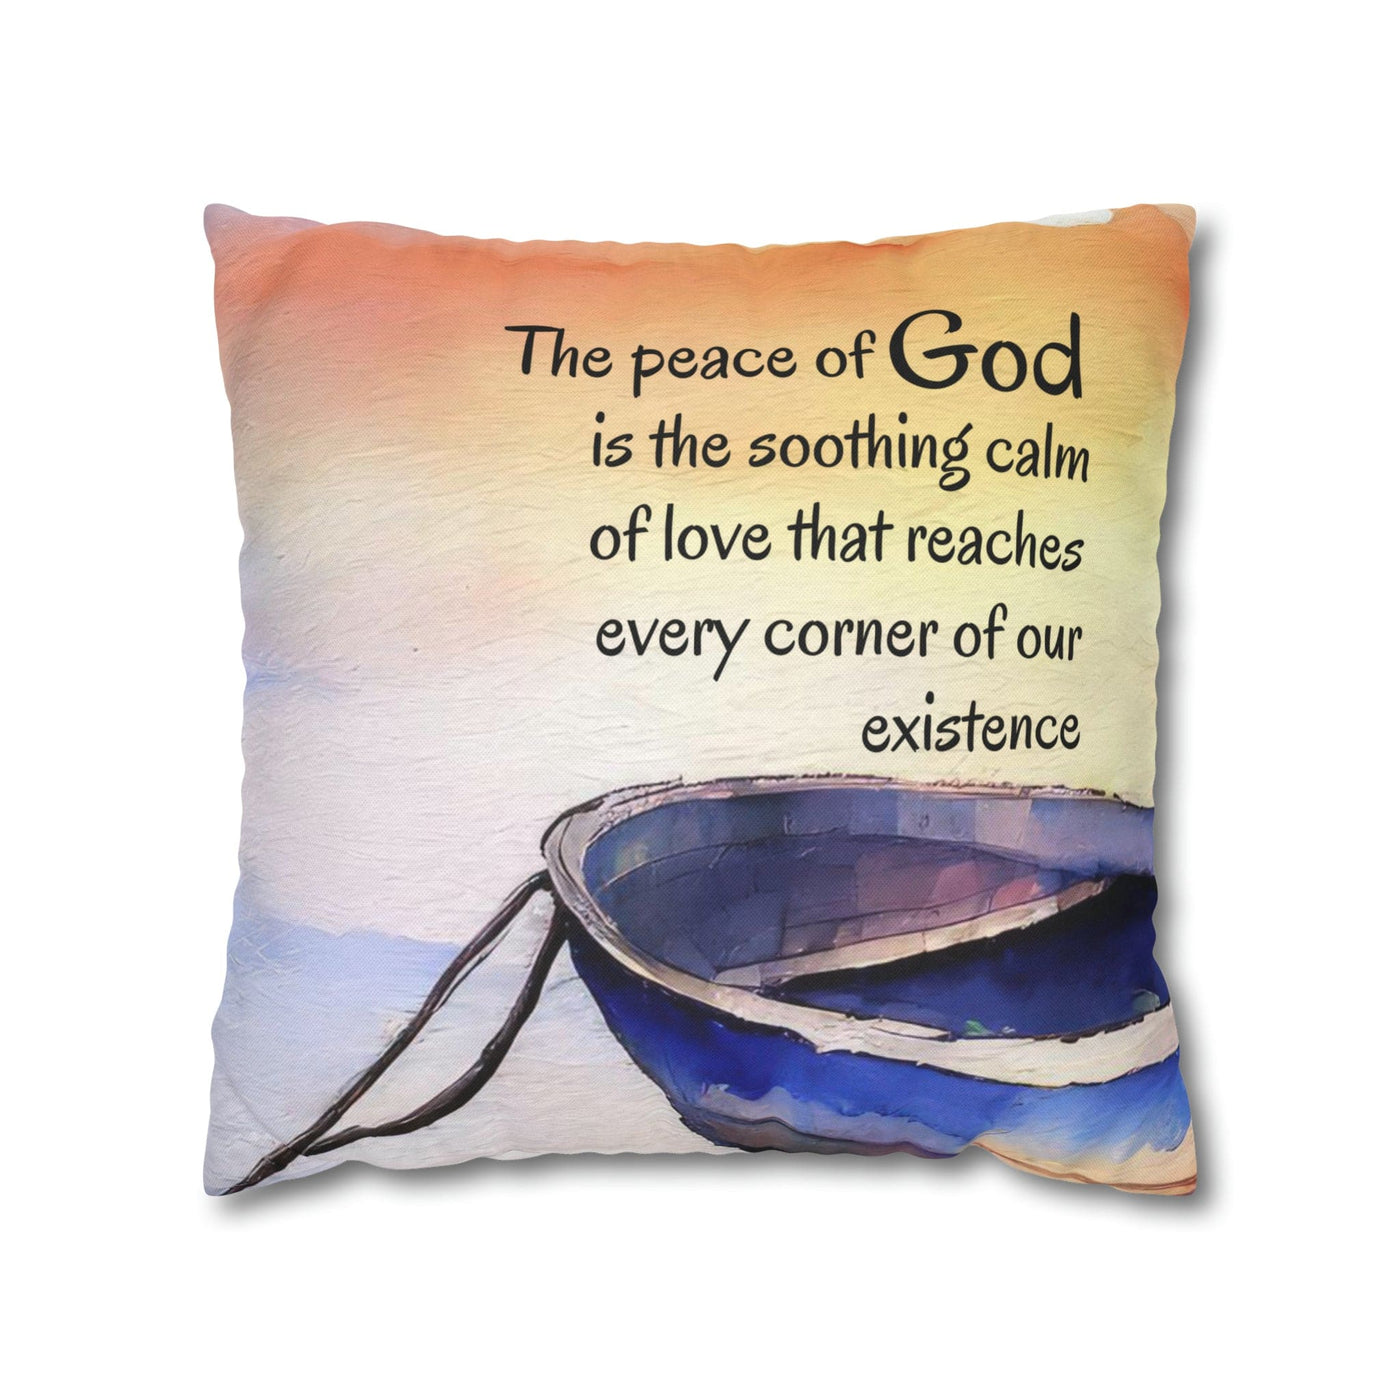 Decorative Throw Pillow Cover The Peace Of God Soothing Calm Illustration